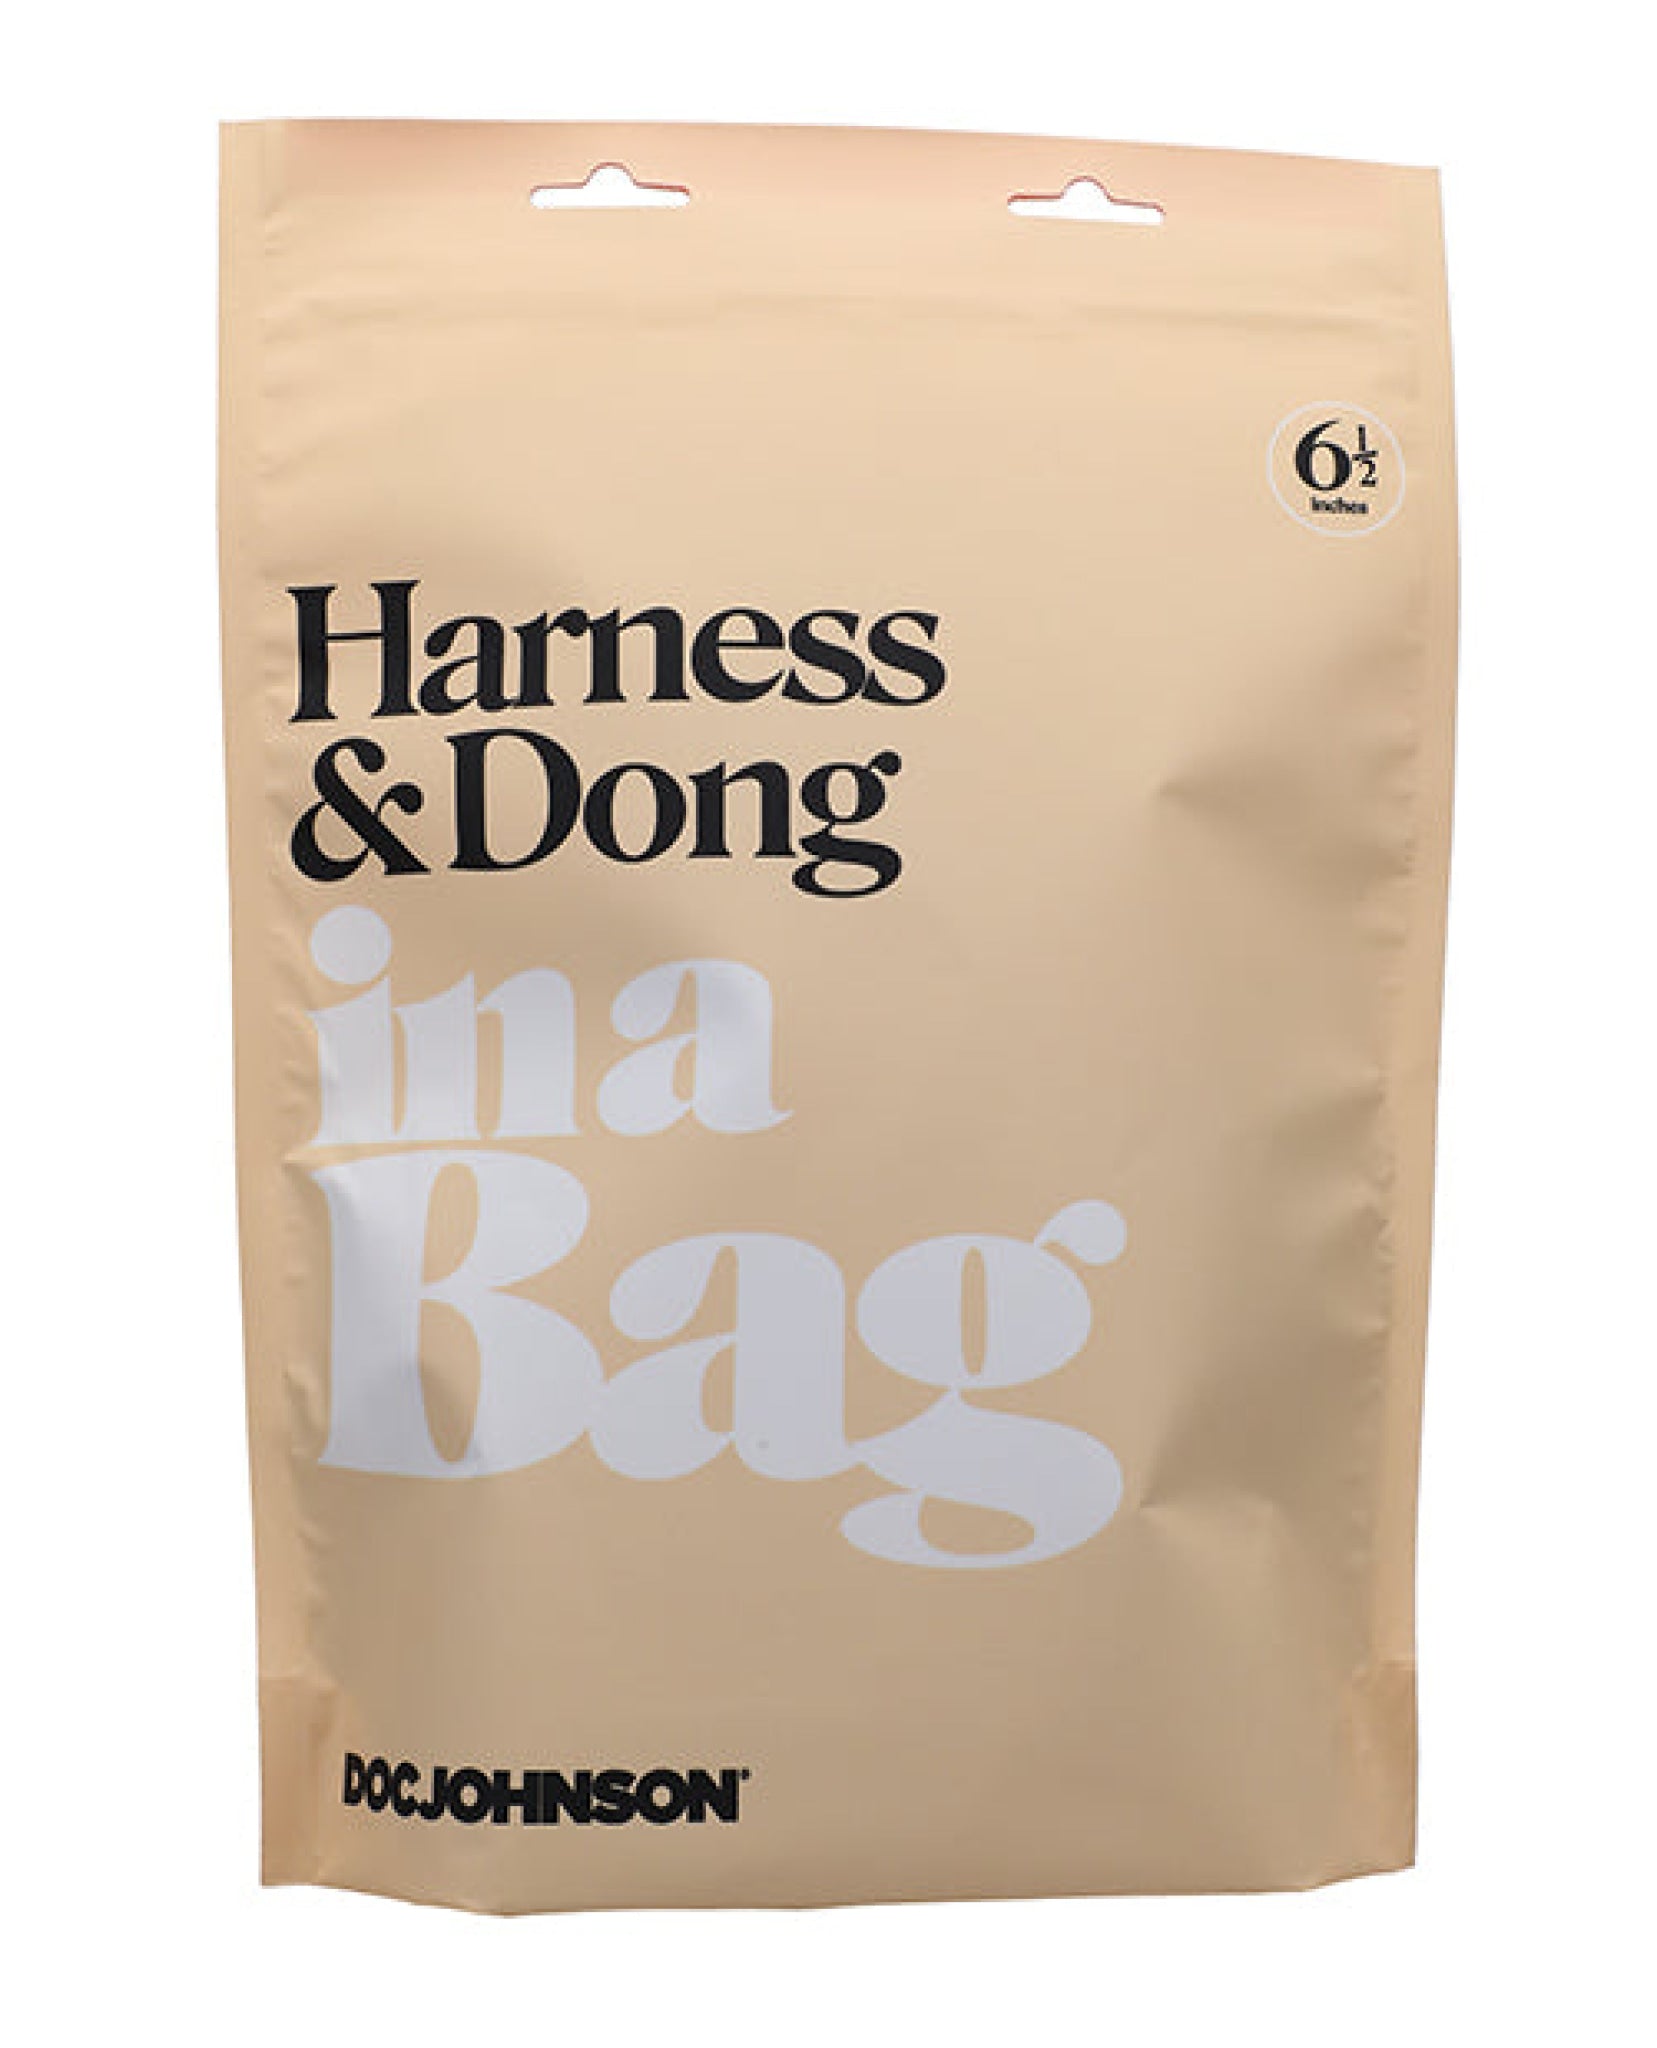 In A Bag Harness & Dong - Black Doc Johnson